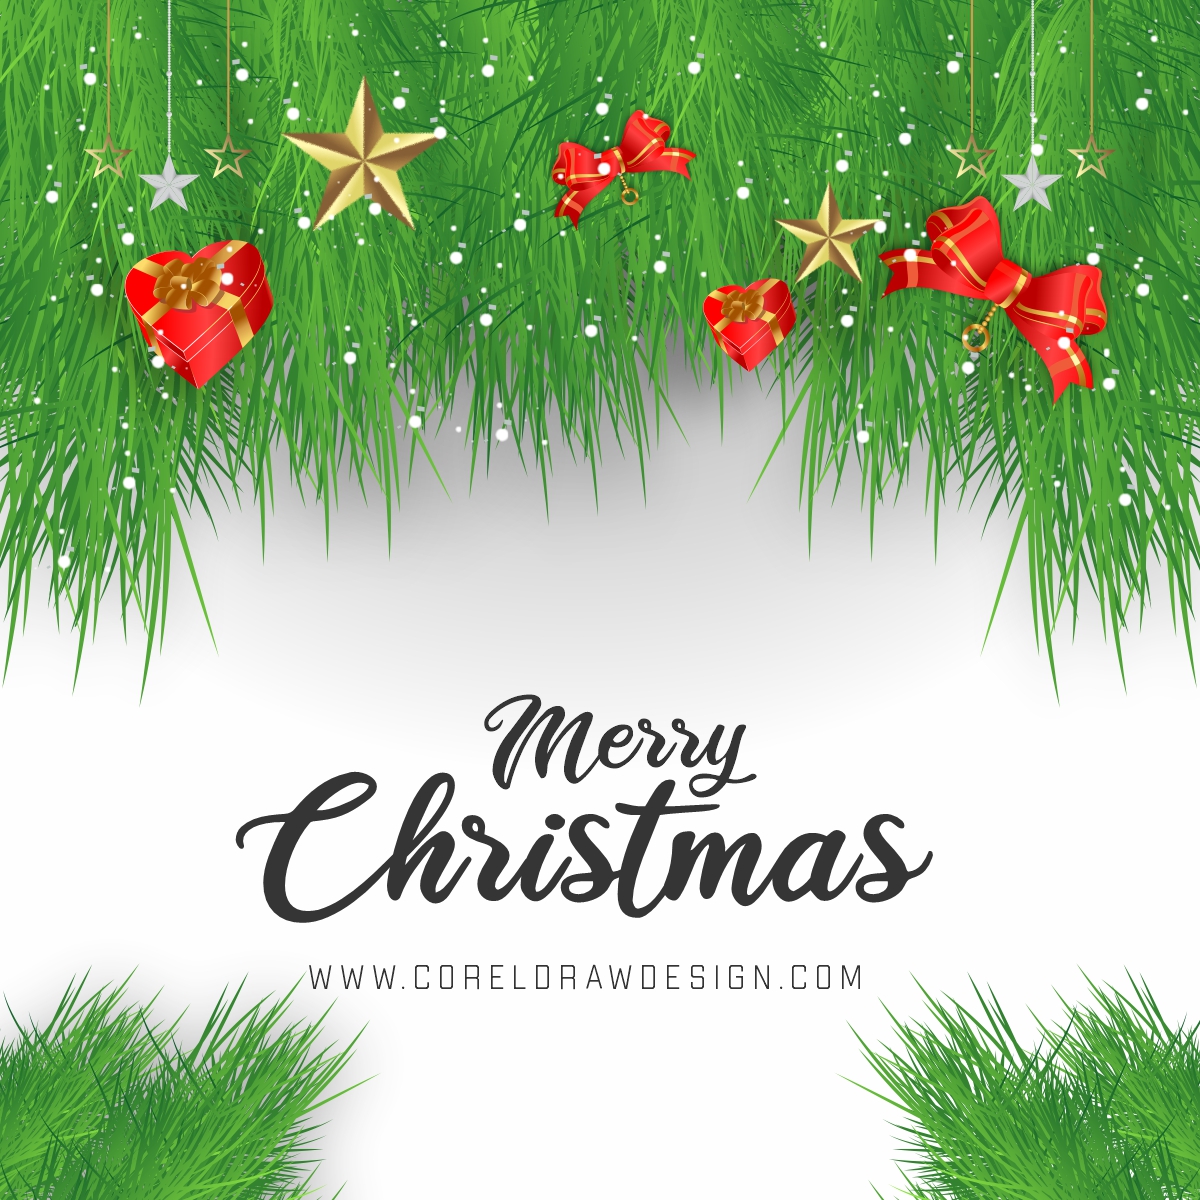 Download Beautiful Christmas Card With Cute Elements Free Vector ...